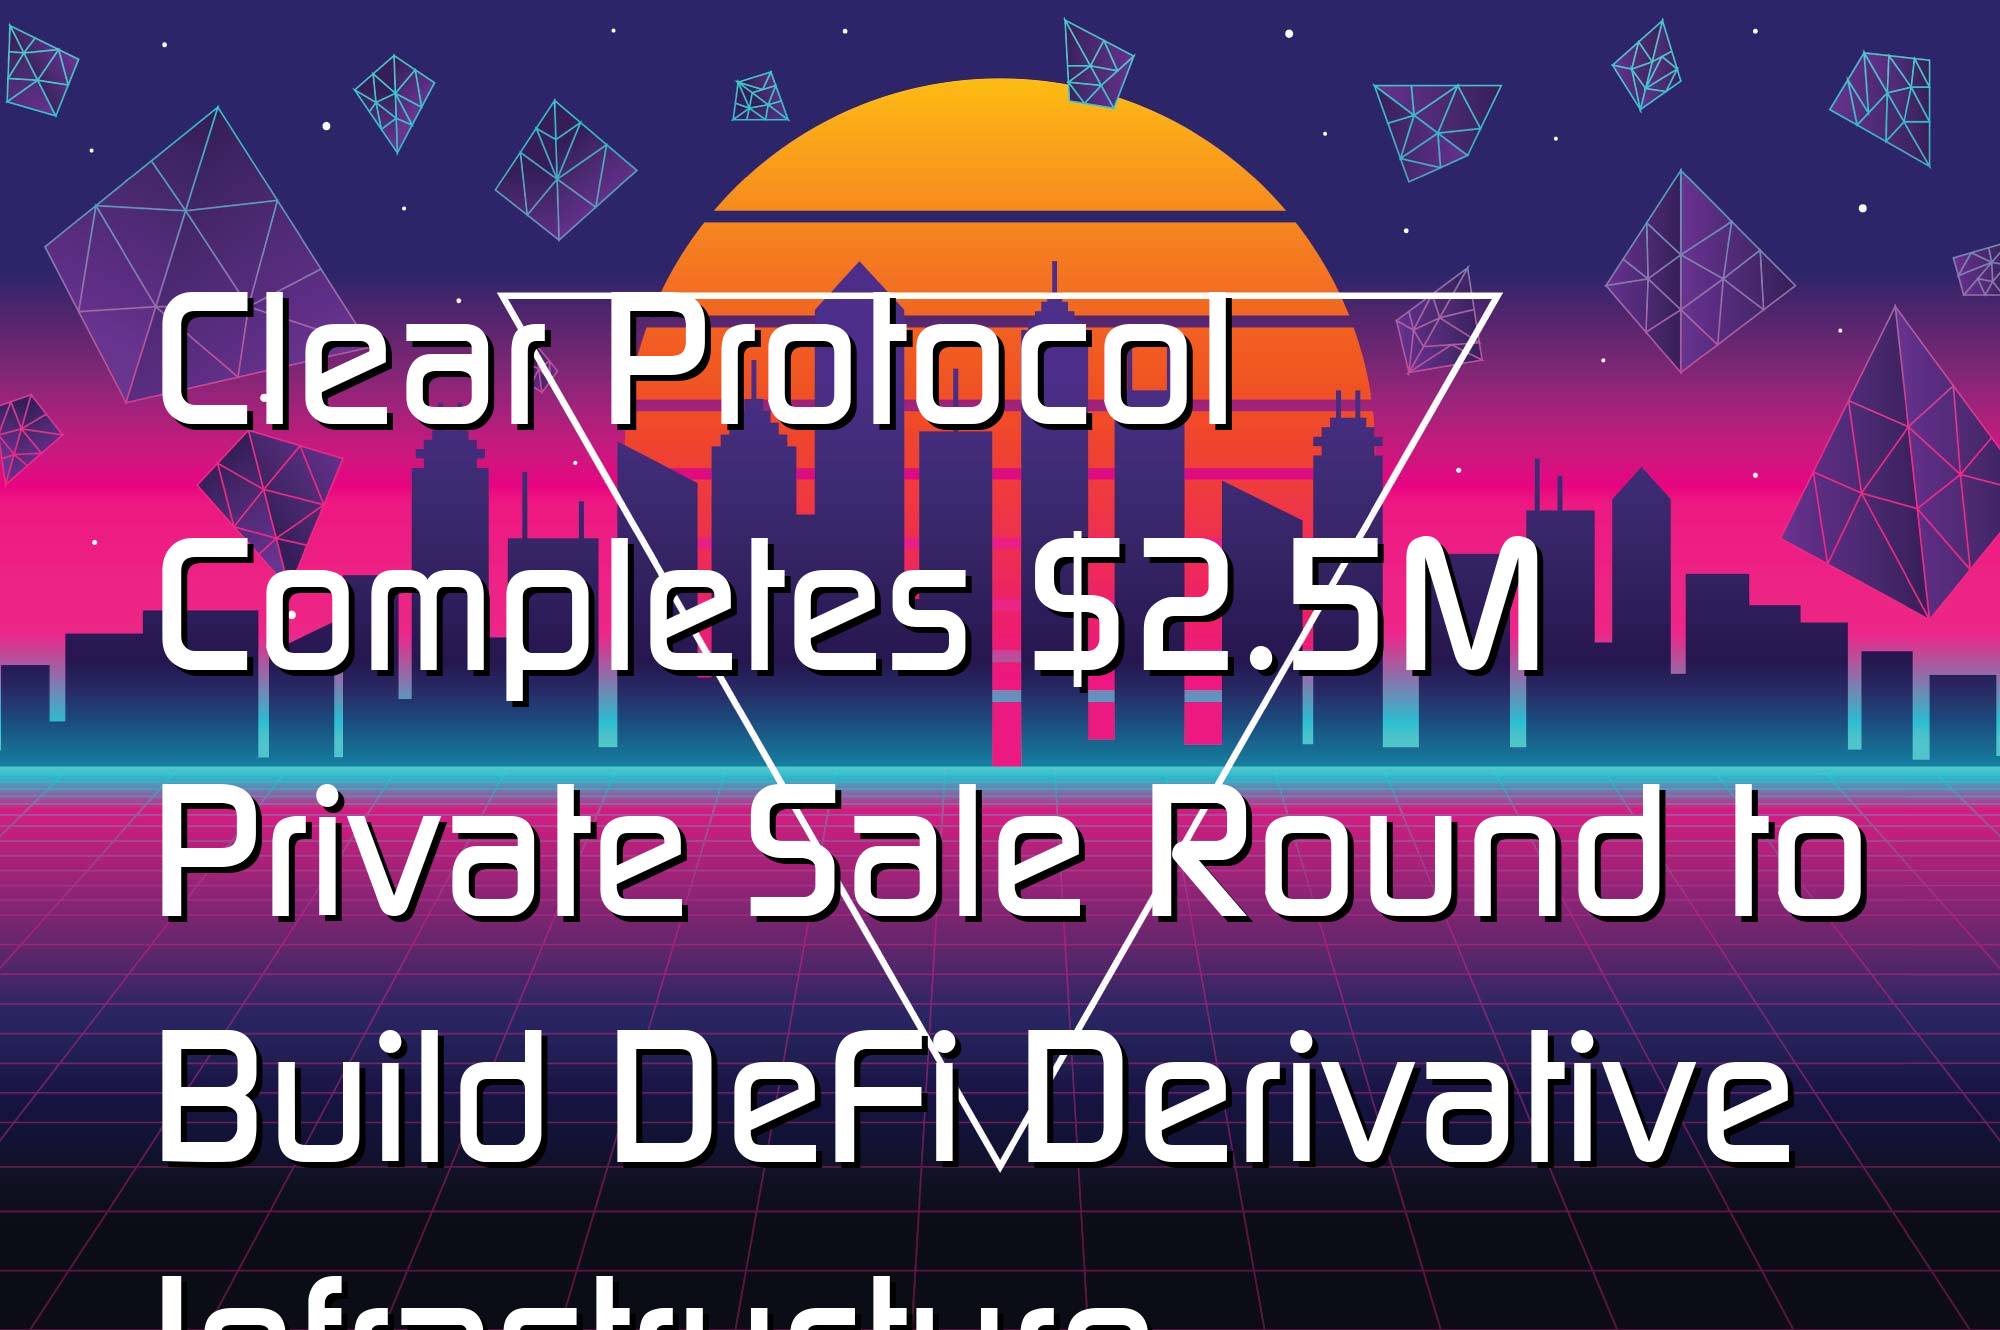 @$64889: Clear Protocol Completes $2.5M Private Sale Round to Build DeFi Derivative Infrastructure